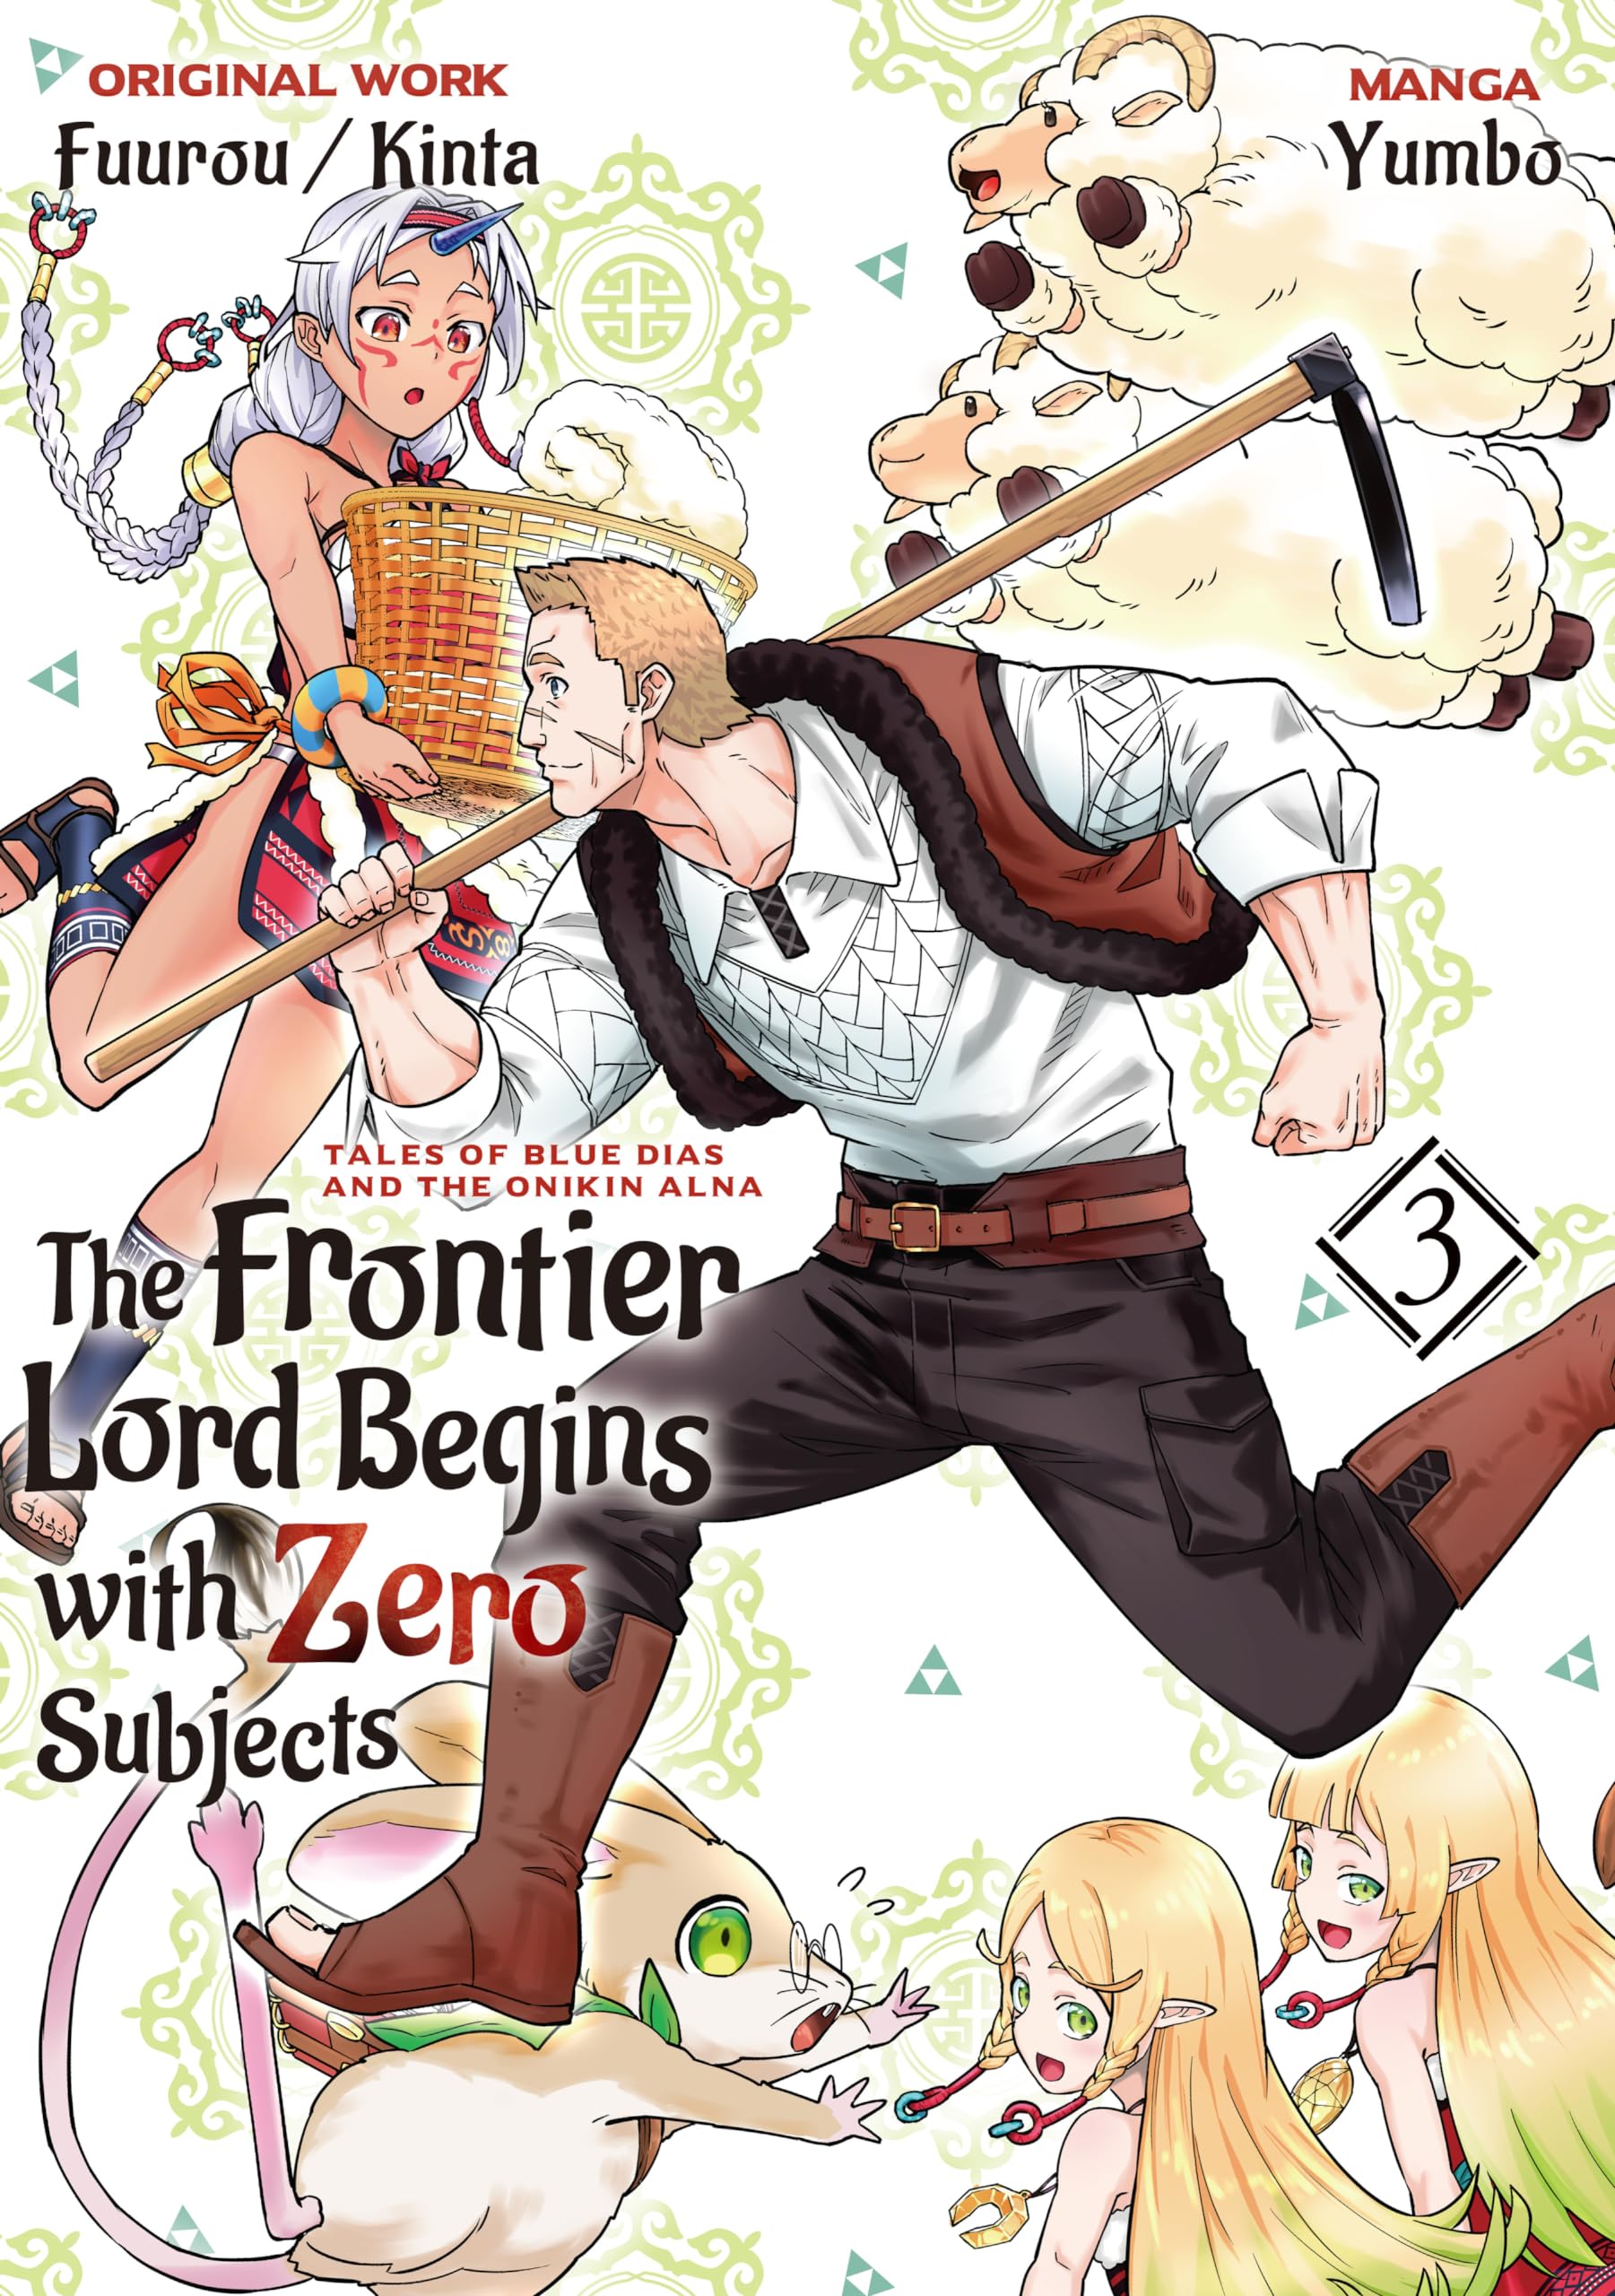 The Frontier Lord Begins with Zero Subjects (Manga): Tales of Blue Dias and the Onikin Alna: Volume 3